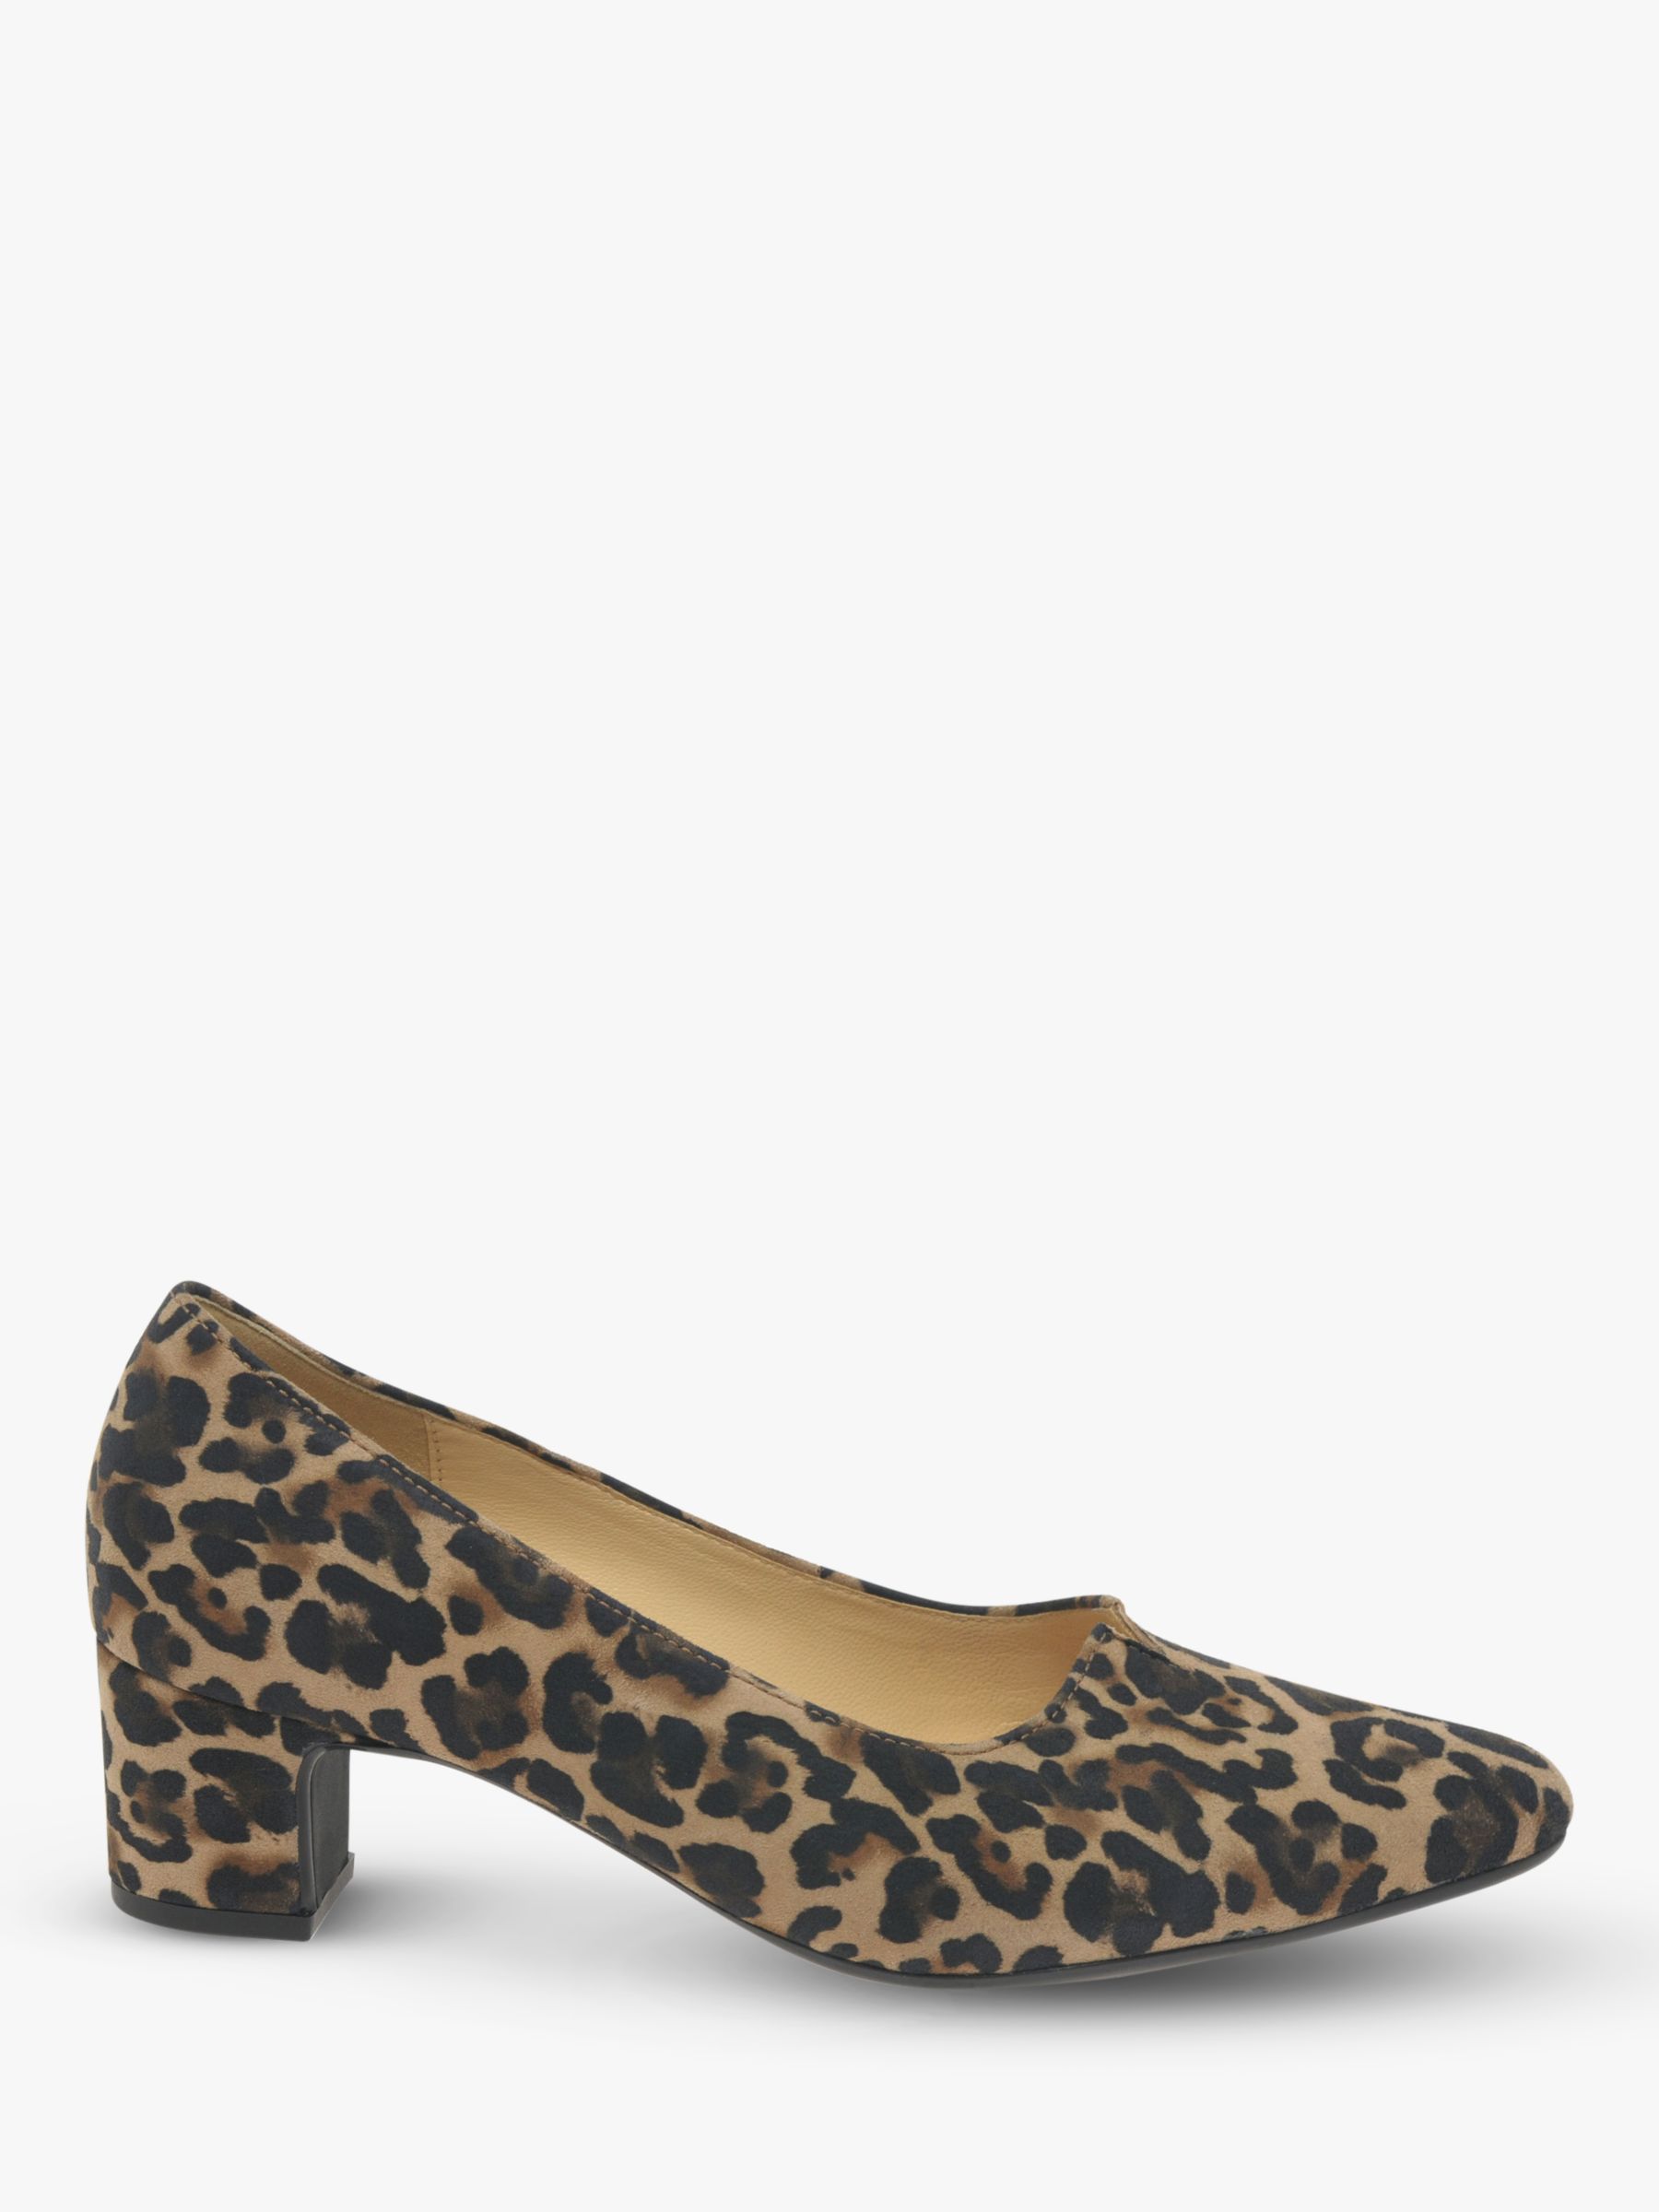 Gabor Eileen Leather Leopard Print Court Shoes, Brown at John Lewis ...